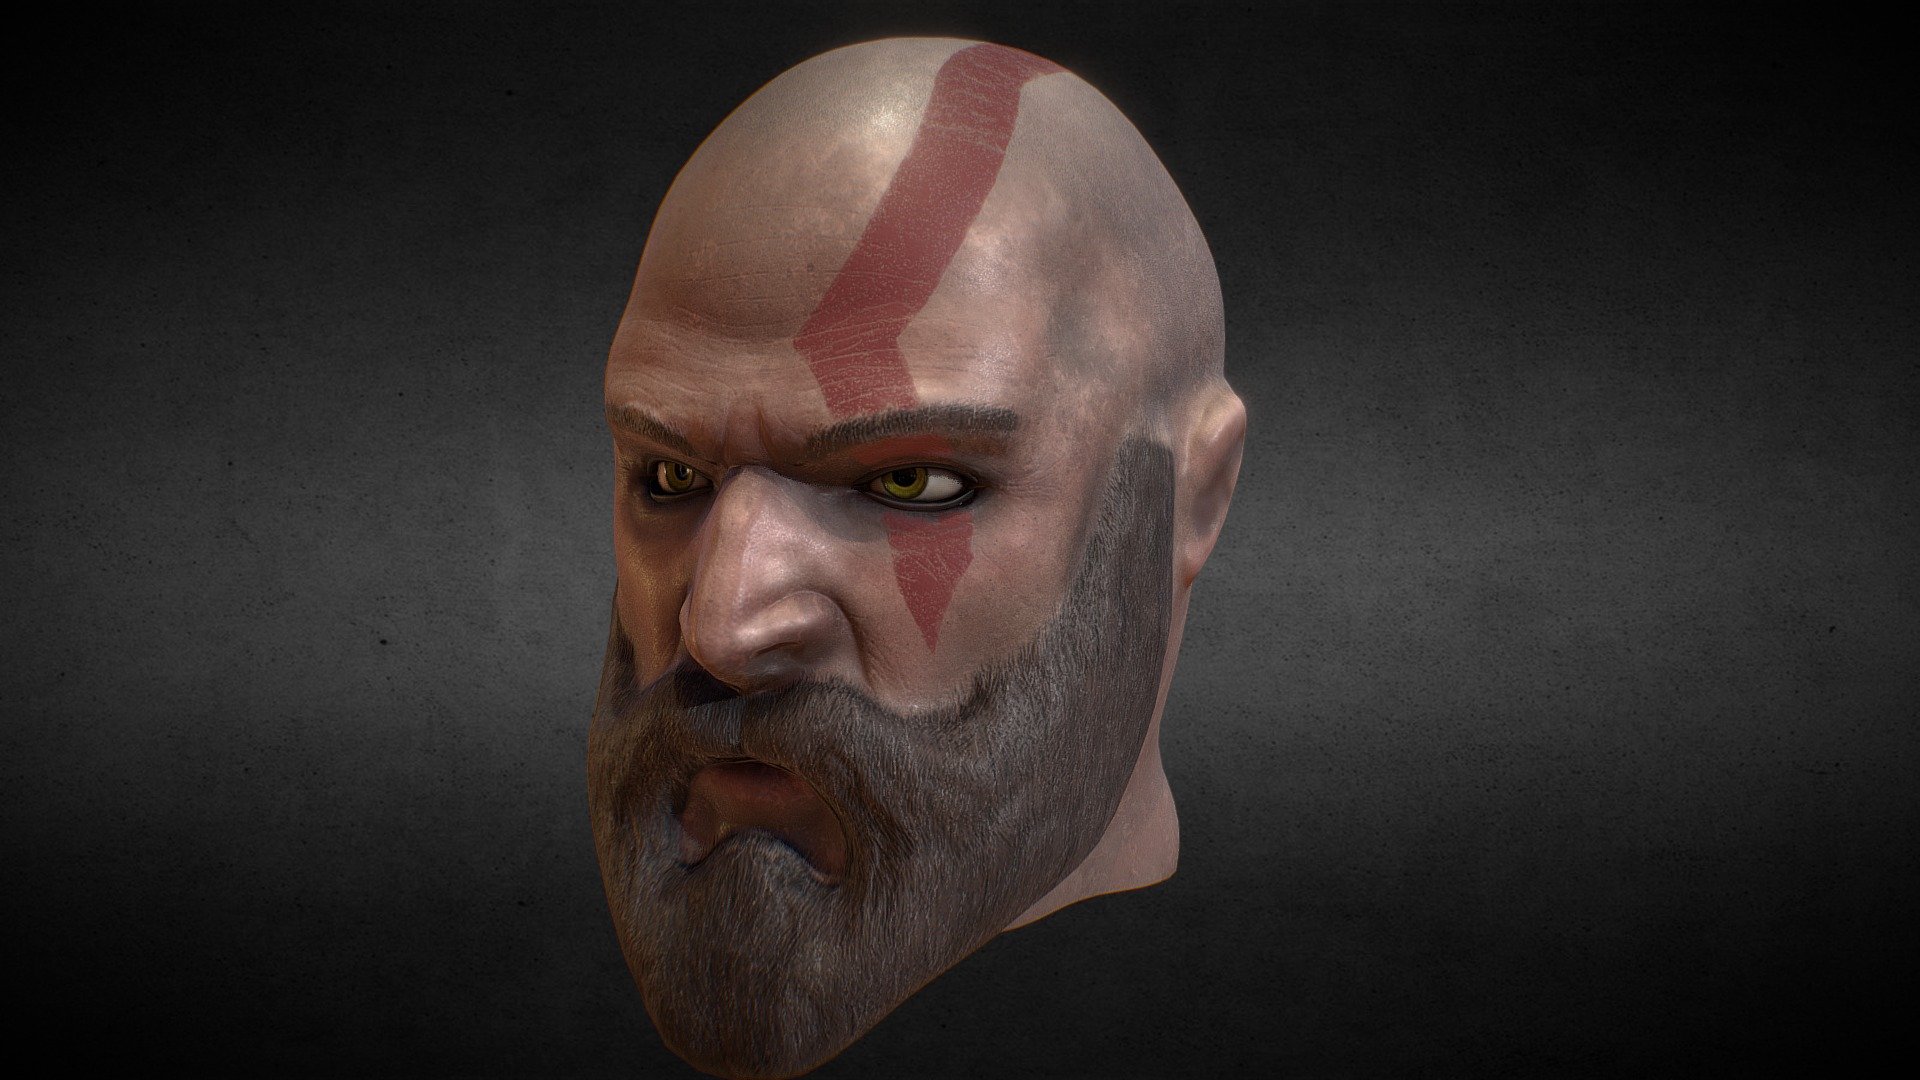 Created this in a couple of hours to see how quickly i could model and texture a head based on references. Kratos was the inspiration for this 3d model